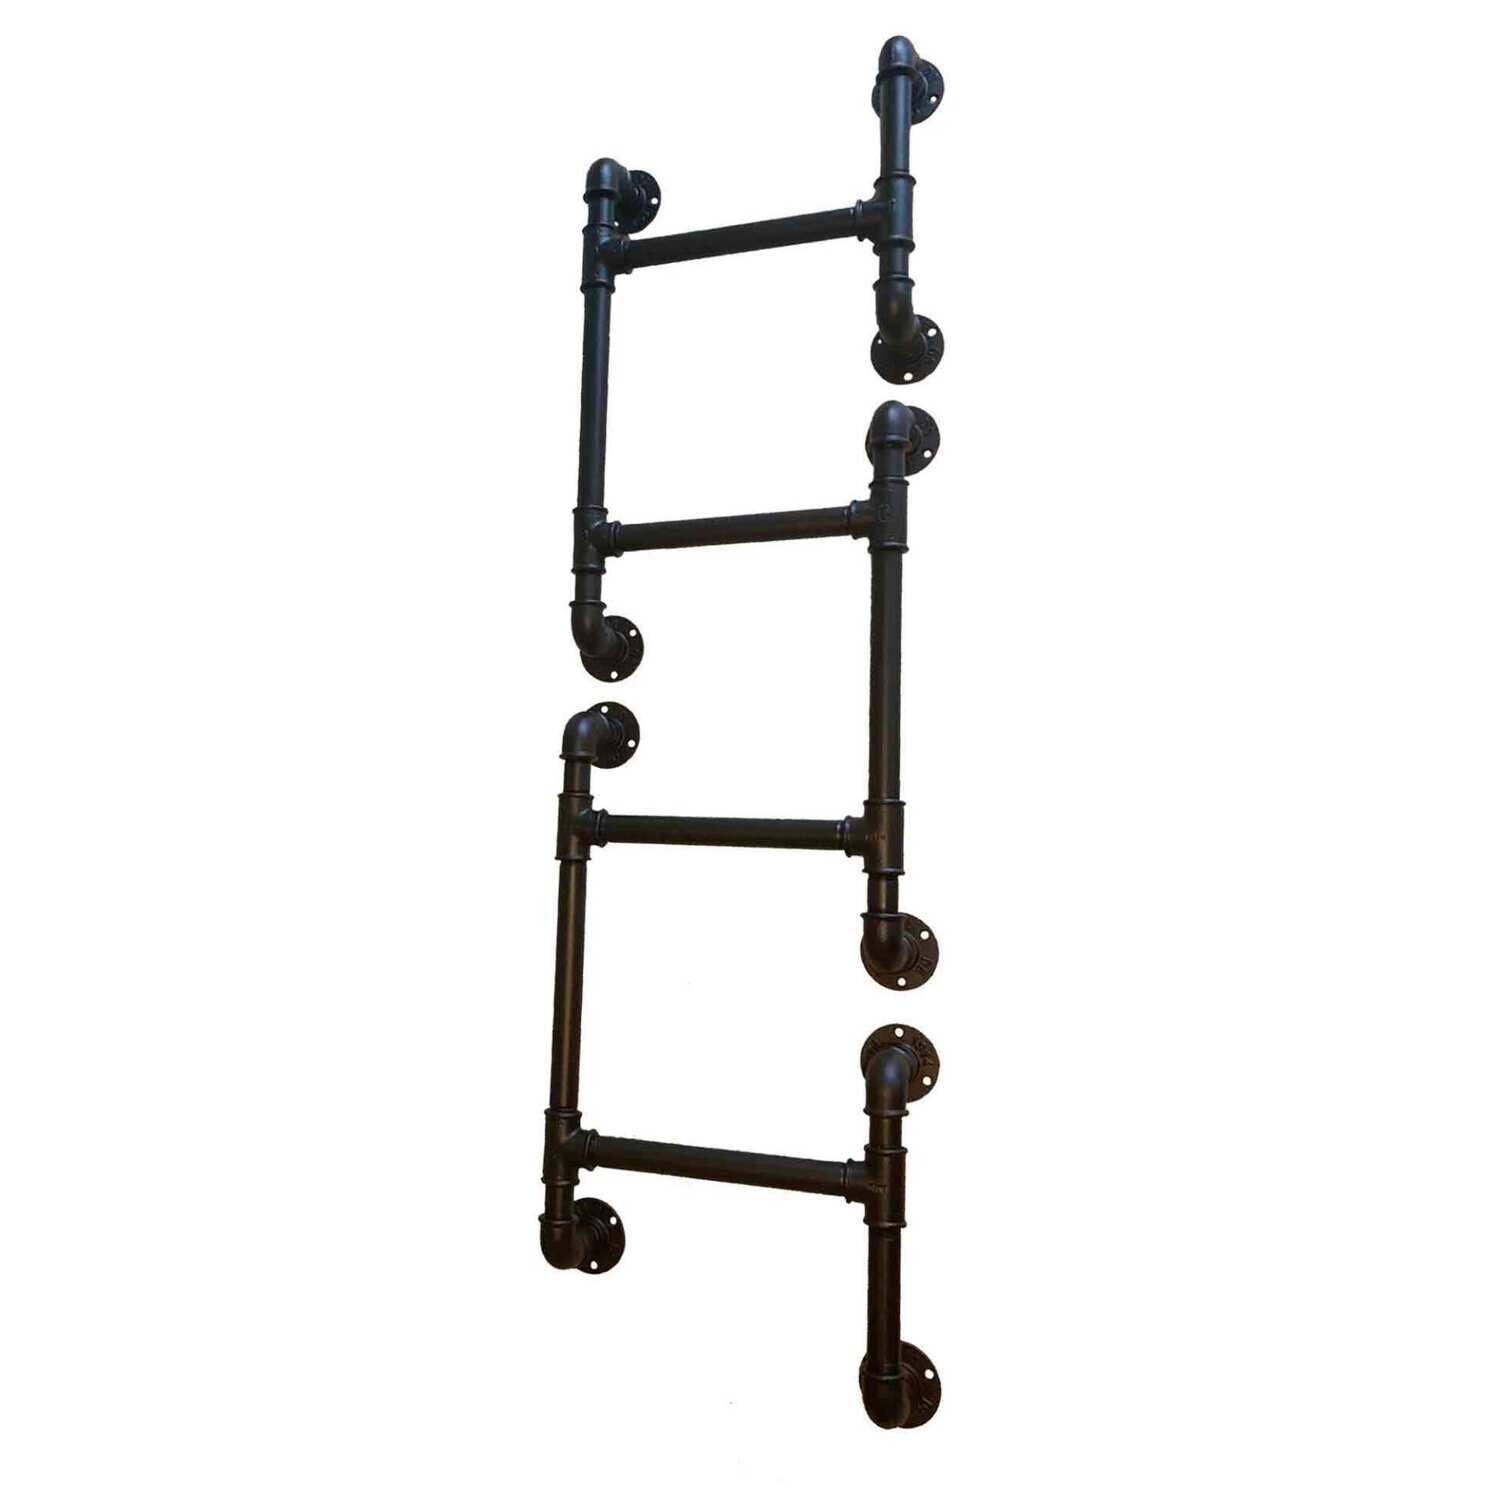 wall mounted pipe ladder for bunk beds, raised or mezzanine floors